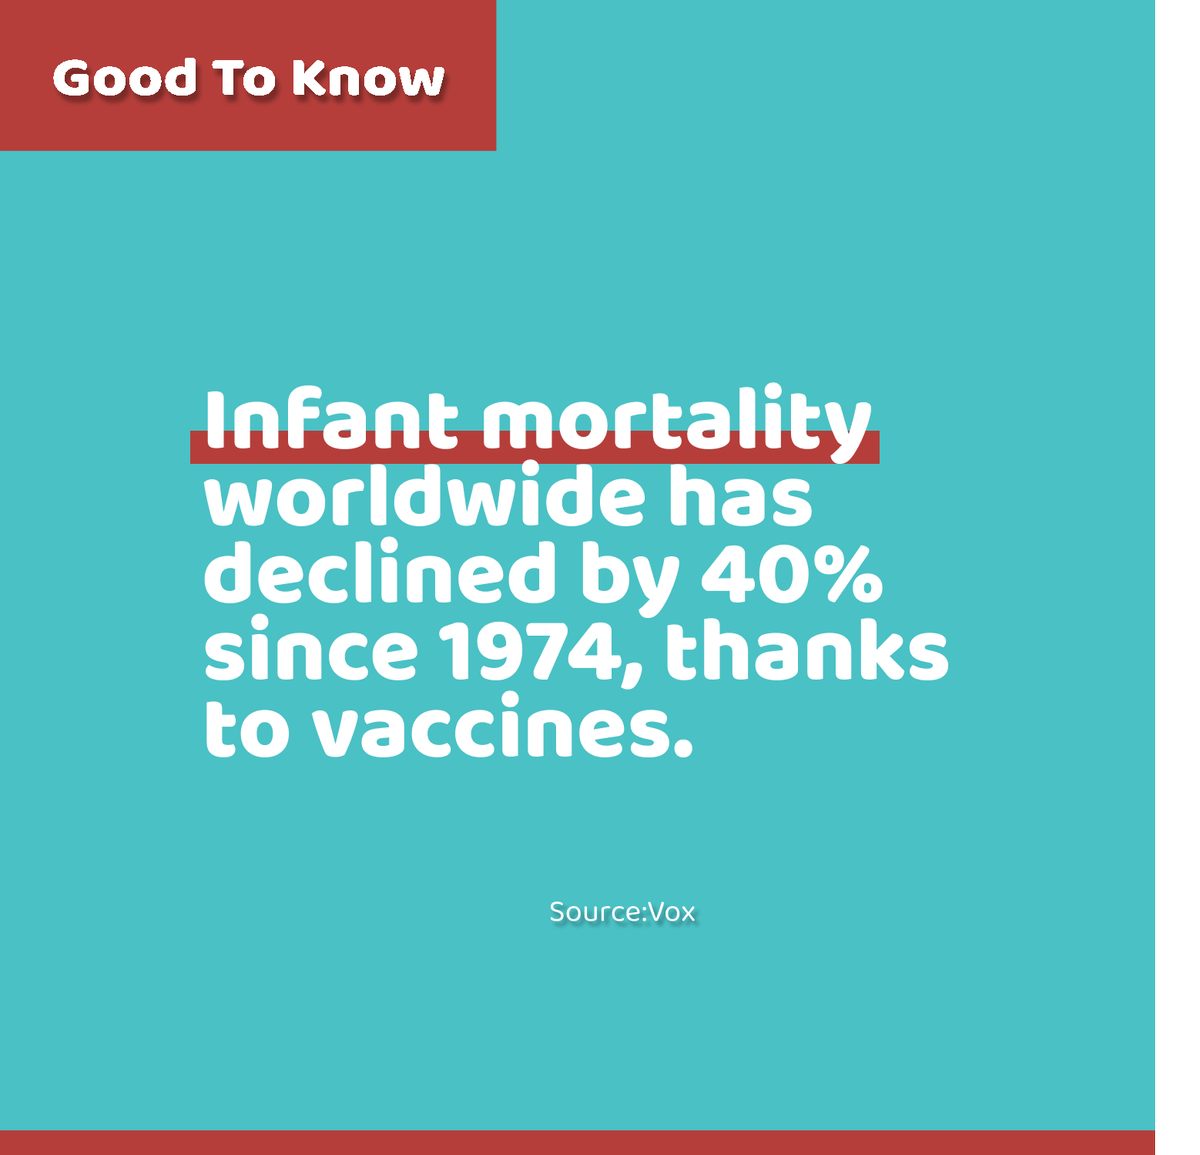 Vaccines are superheroes!🦸‍♀️ Infant mortality down 40% globally since 1974. Read more about this life-saving impact. Link in bio. #PublicHealth #Science #goodnews #goodbites